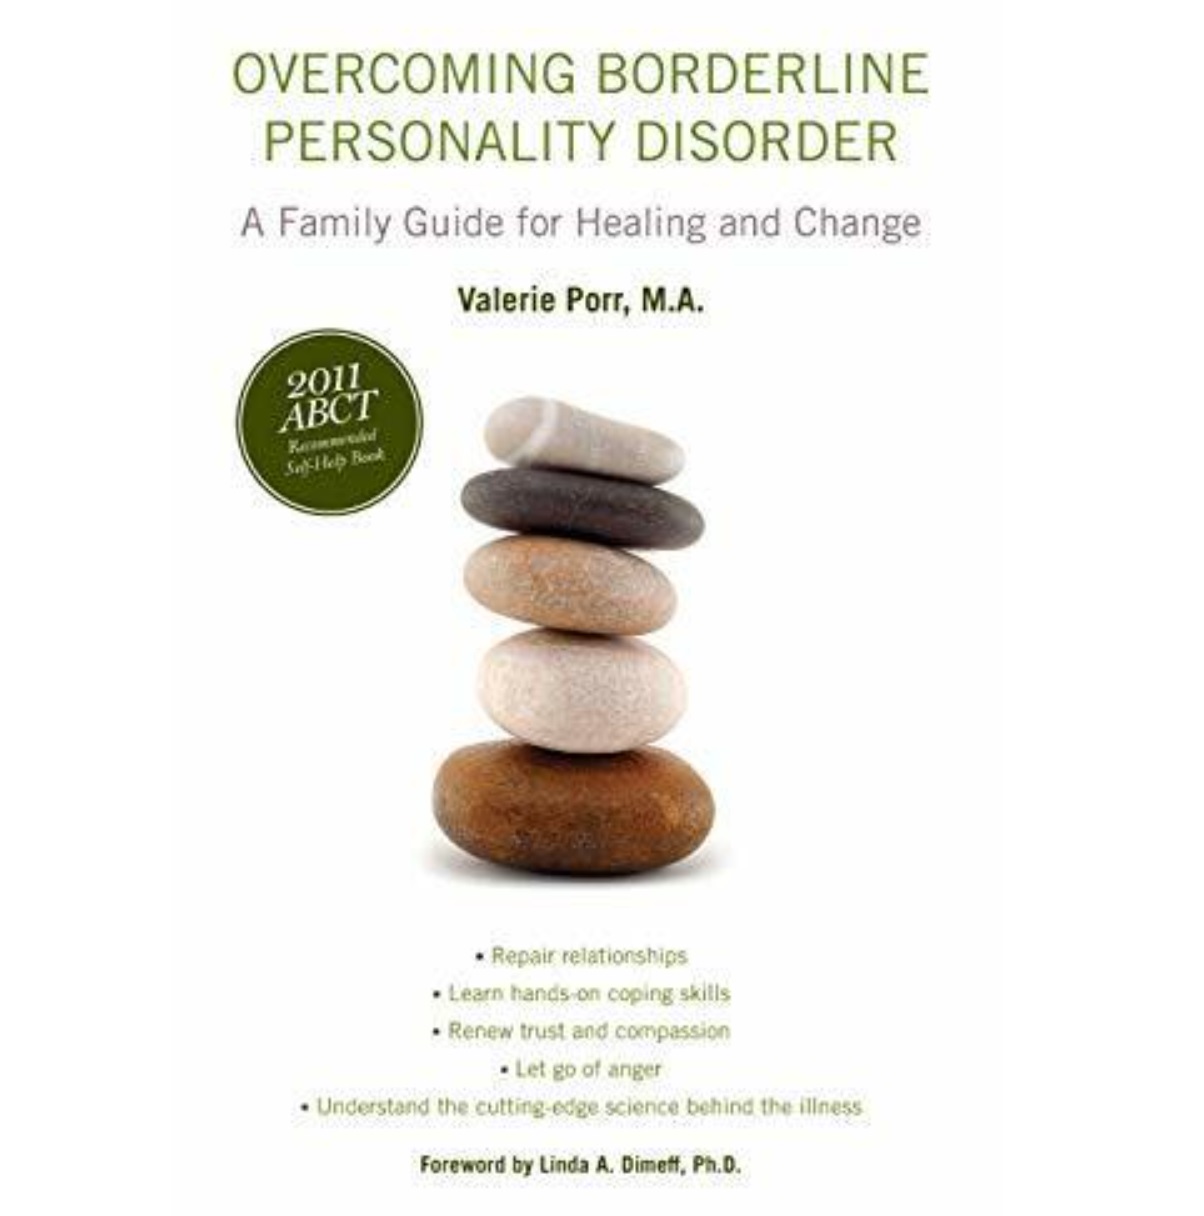 Overcoming Borderline Personality Disorder - A Book Review